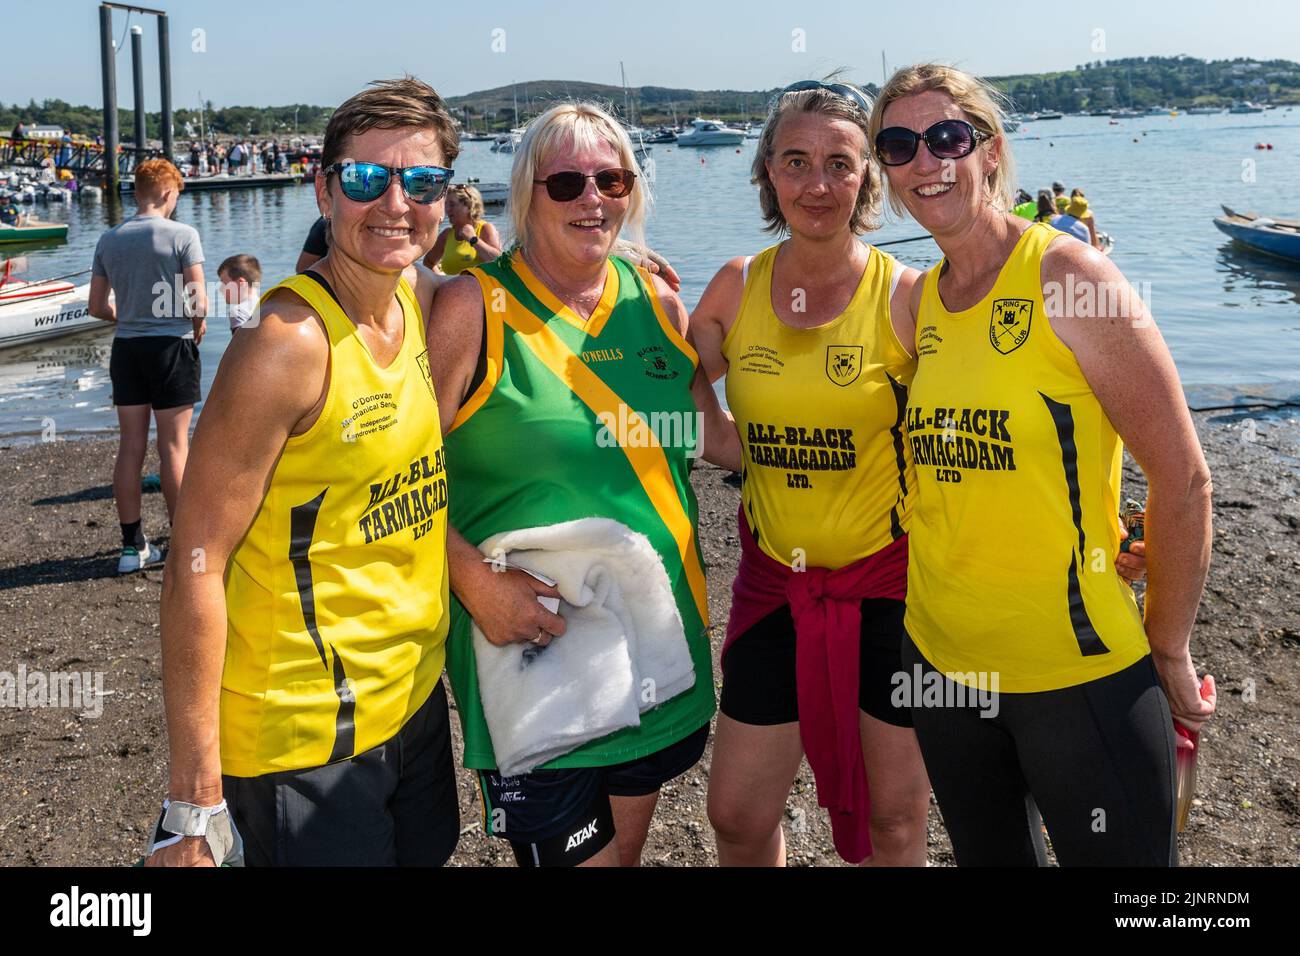 Schull, West Cork, Ireland. 13th Aug, 2022. The 2022 Irish Coastal Rowing Championships is taking place this weekend in Schull, West Cork. A total of 290 crews from different clubs are taking part in the event which finishes Sunday evening. Ring Rowing Club Ladies team took part in the racing Credit: AG News/Alamy Live News Stock Photo